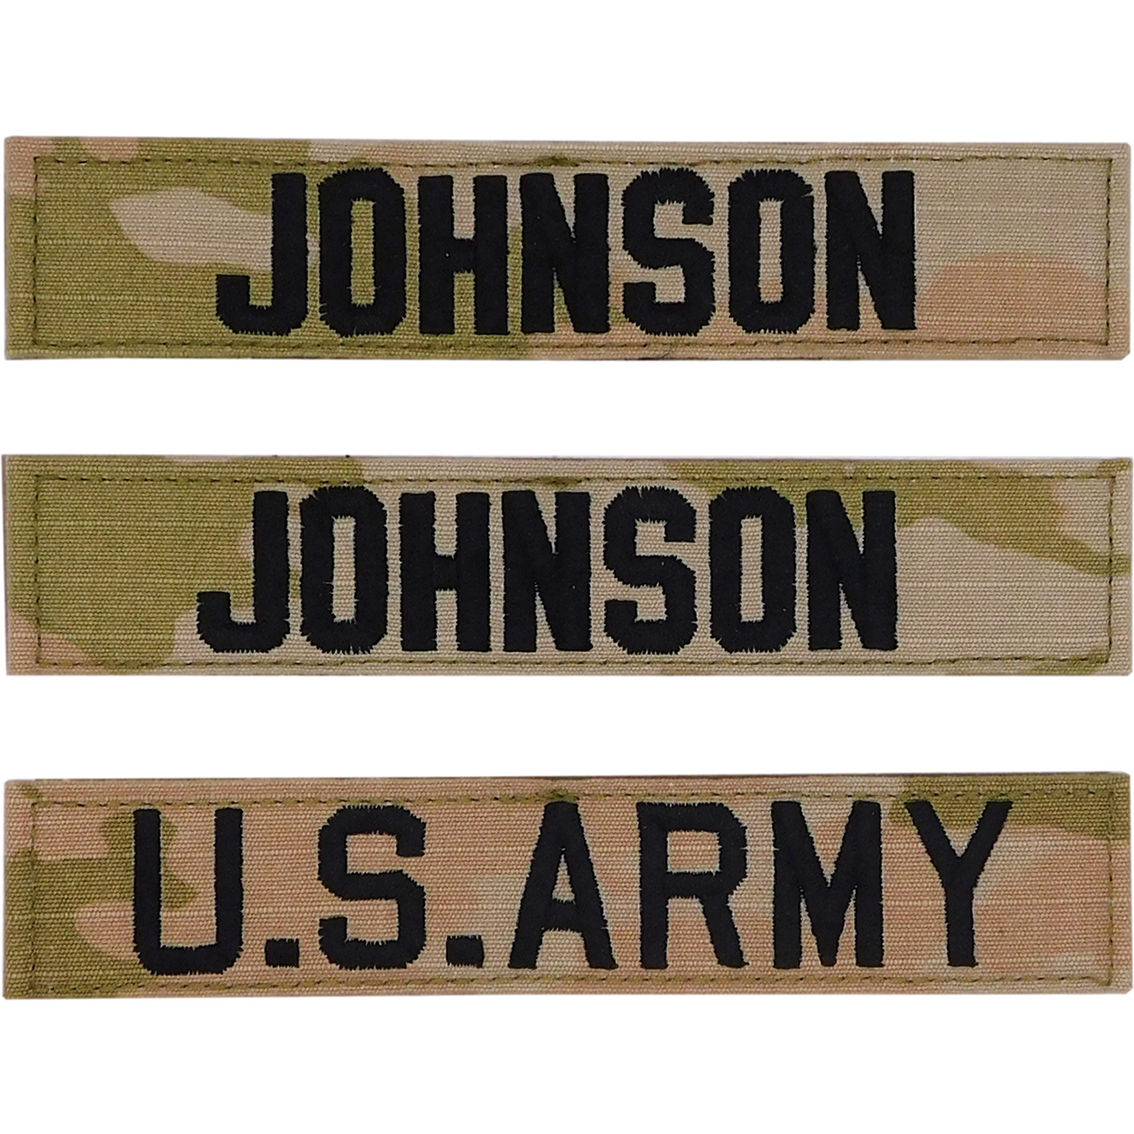 Embroidered Army Ocp Nametape Kit With Velcro (uniform Builder